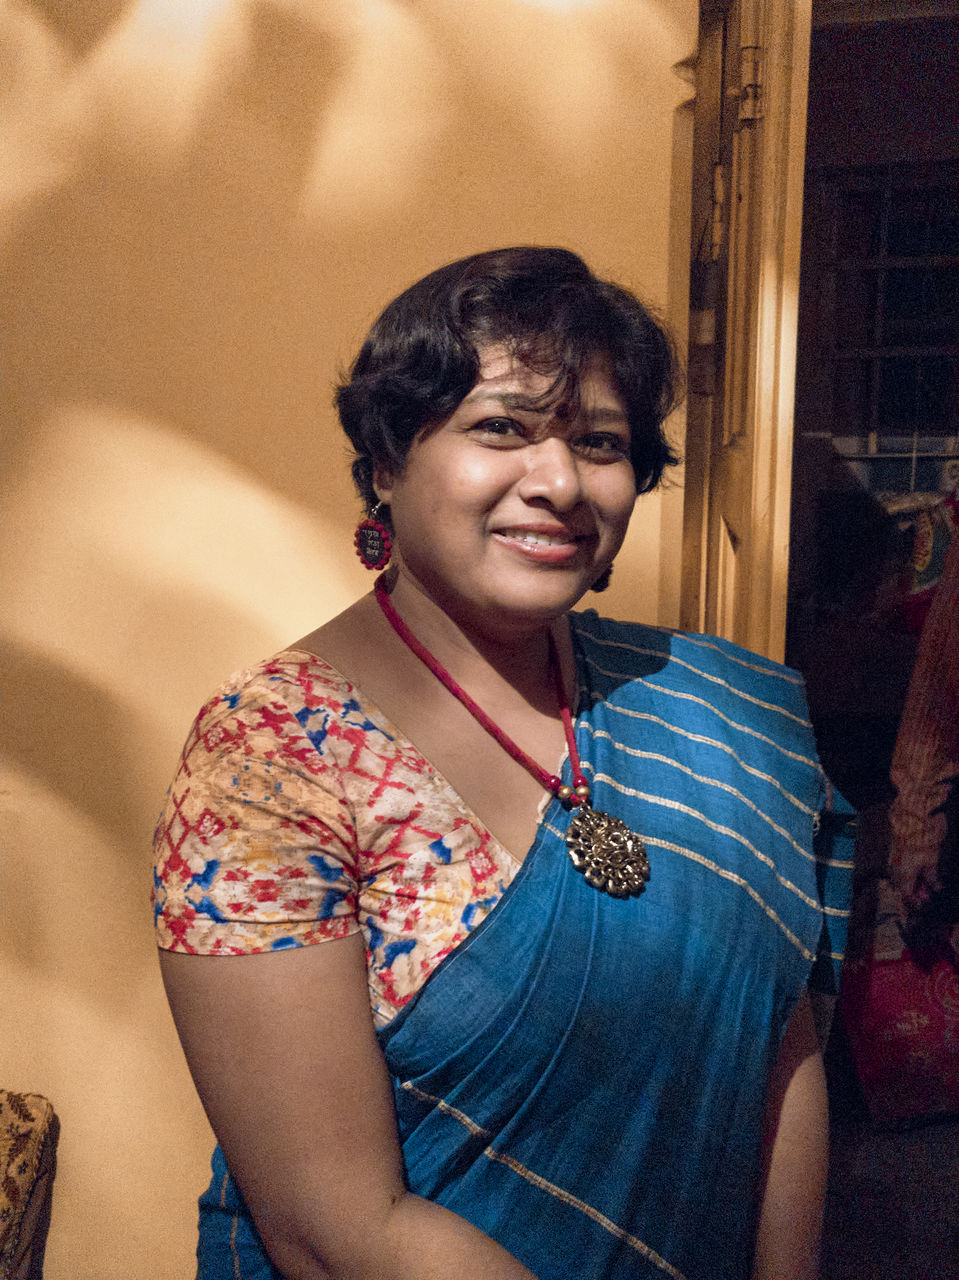 Indoor portrait of a smiling indian woman in fashionable sari, lit by incandescent warm lighting